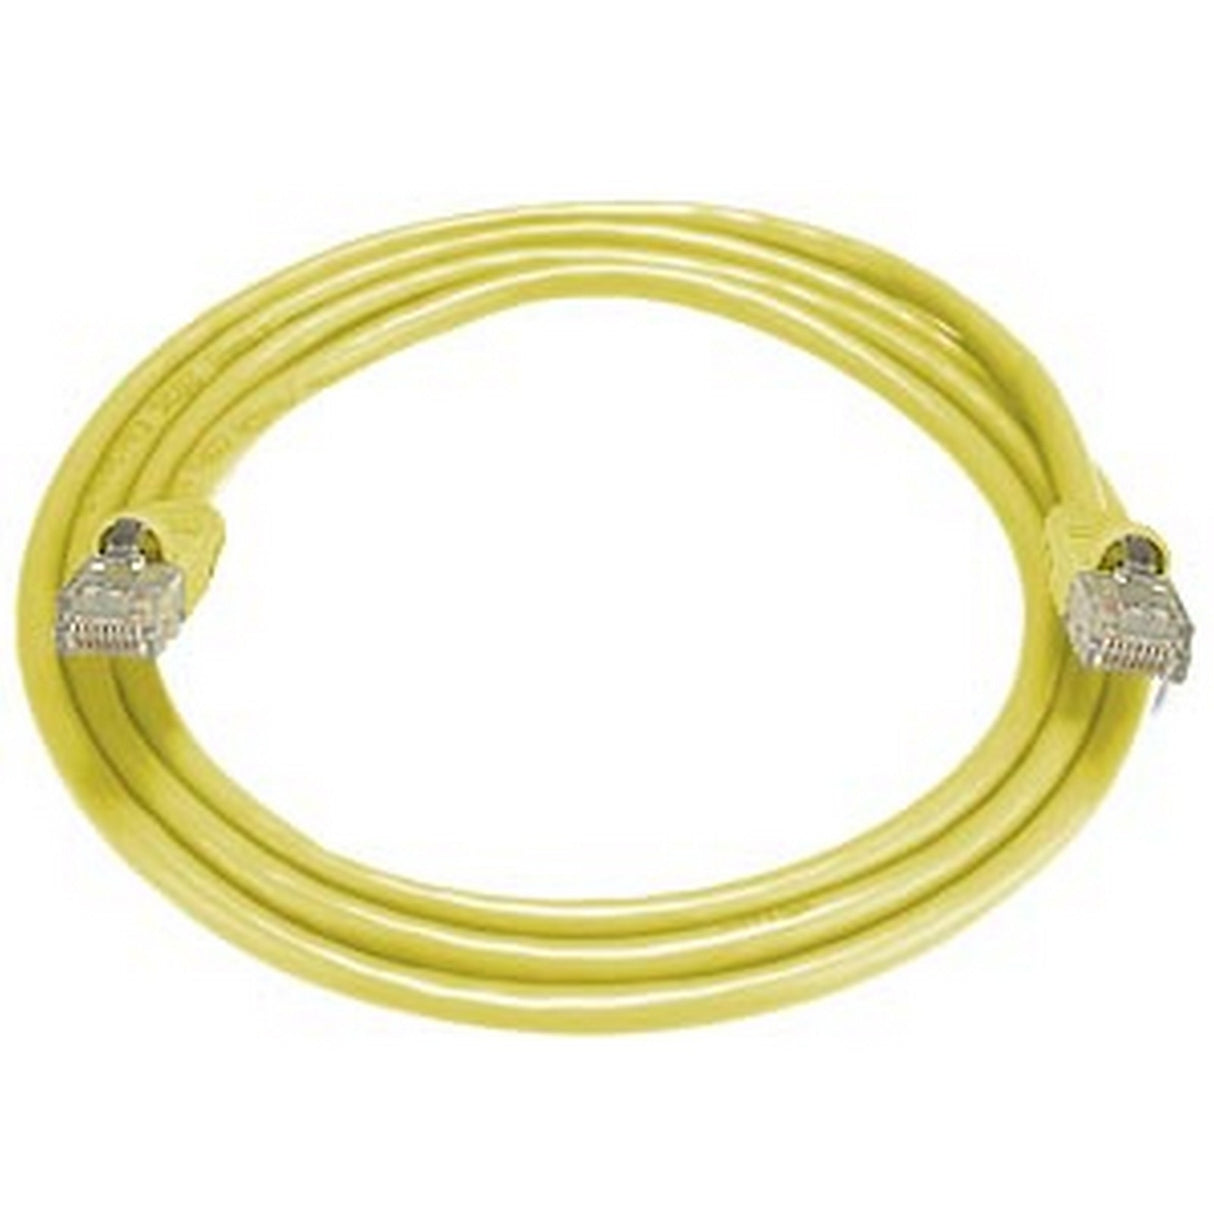 NTI CAT5E-5-YELLOW CAT5e Stranded Unshielded Cable, Yellow, 5-Foot